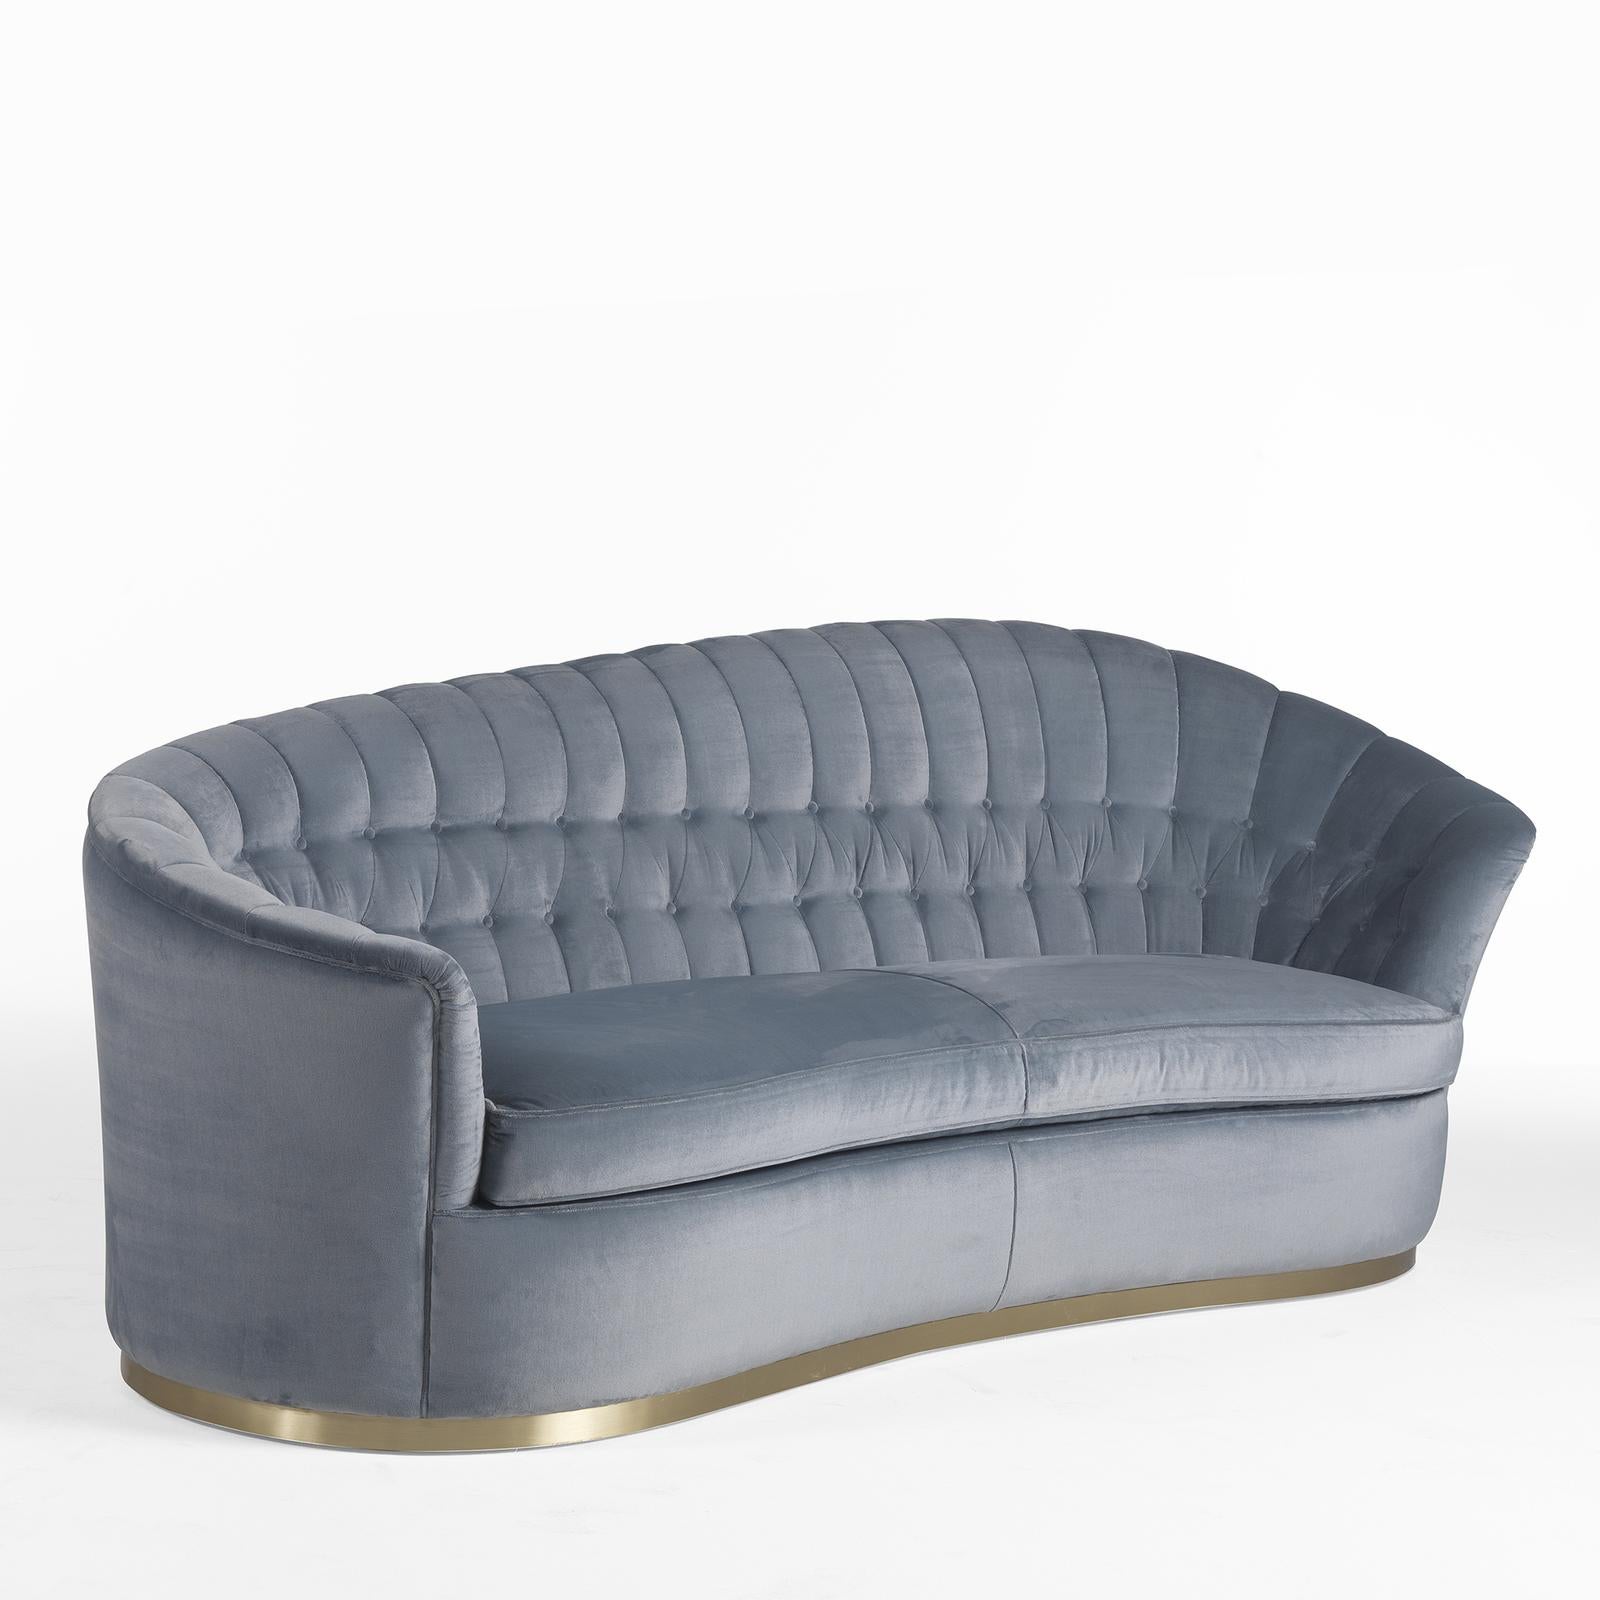 Bold and dynamic, this exclusive sofa will be a refined statement in any modern or traditional living room. Fashioned of solid wood, the dramatic frame is distinguished by the sinuous, high-low profile of the backrest that seamlessly flows into the